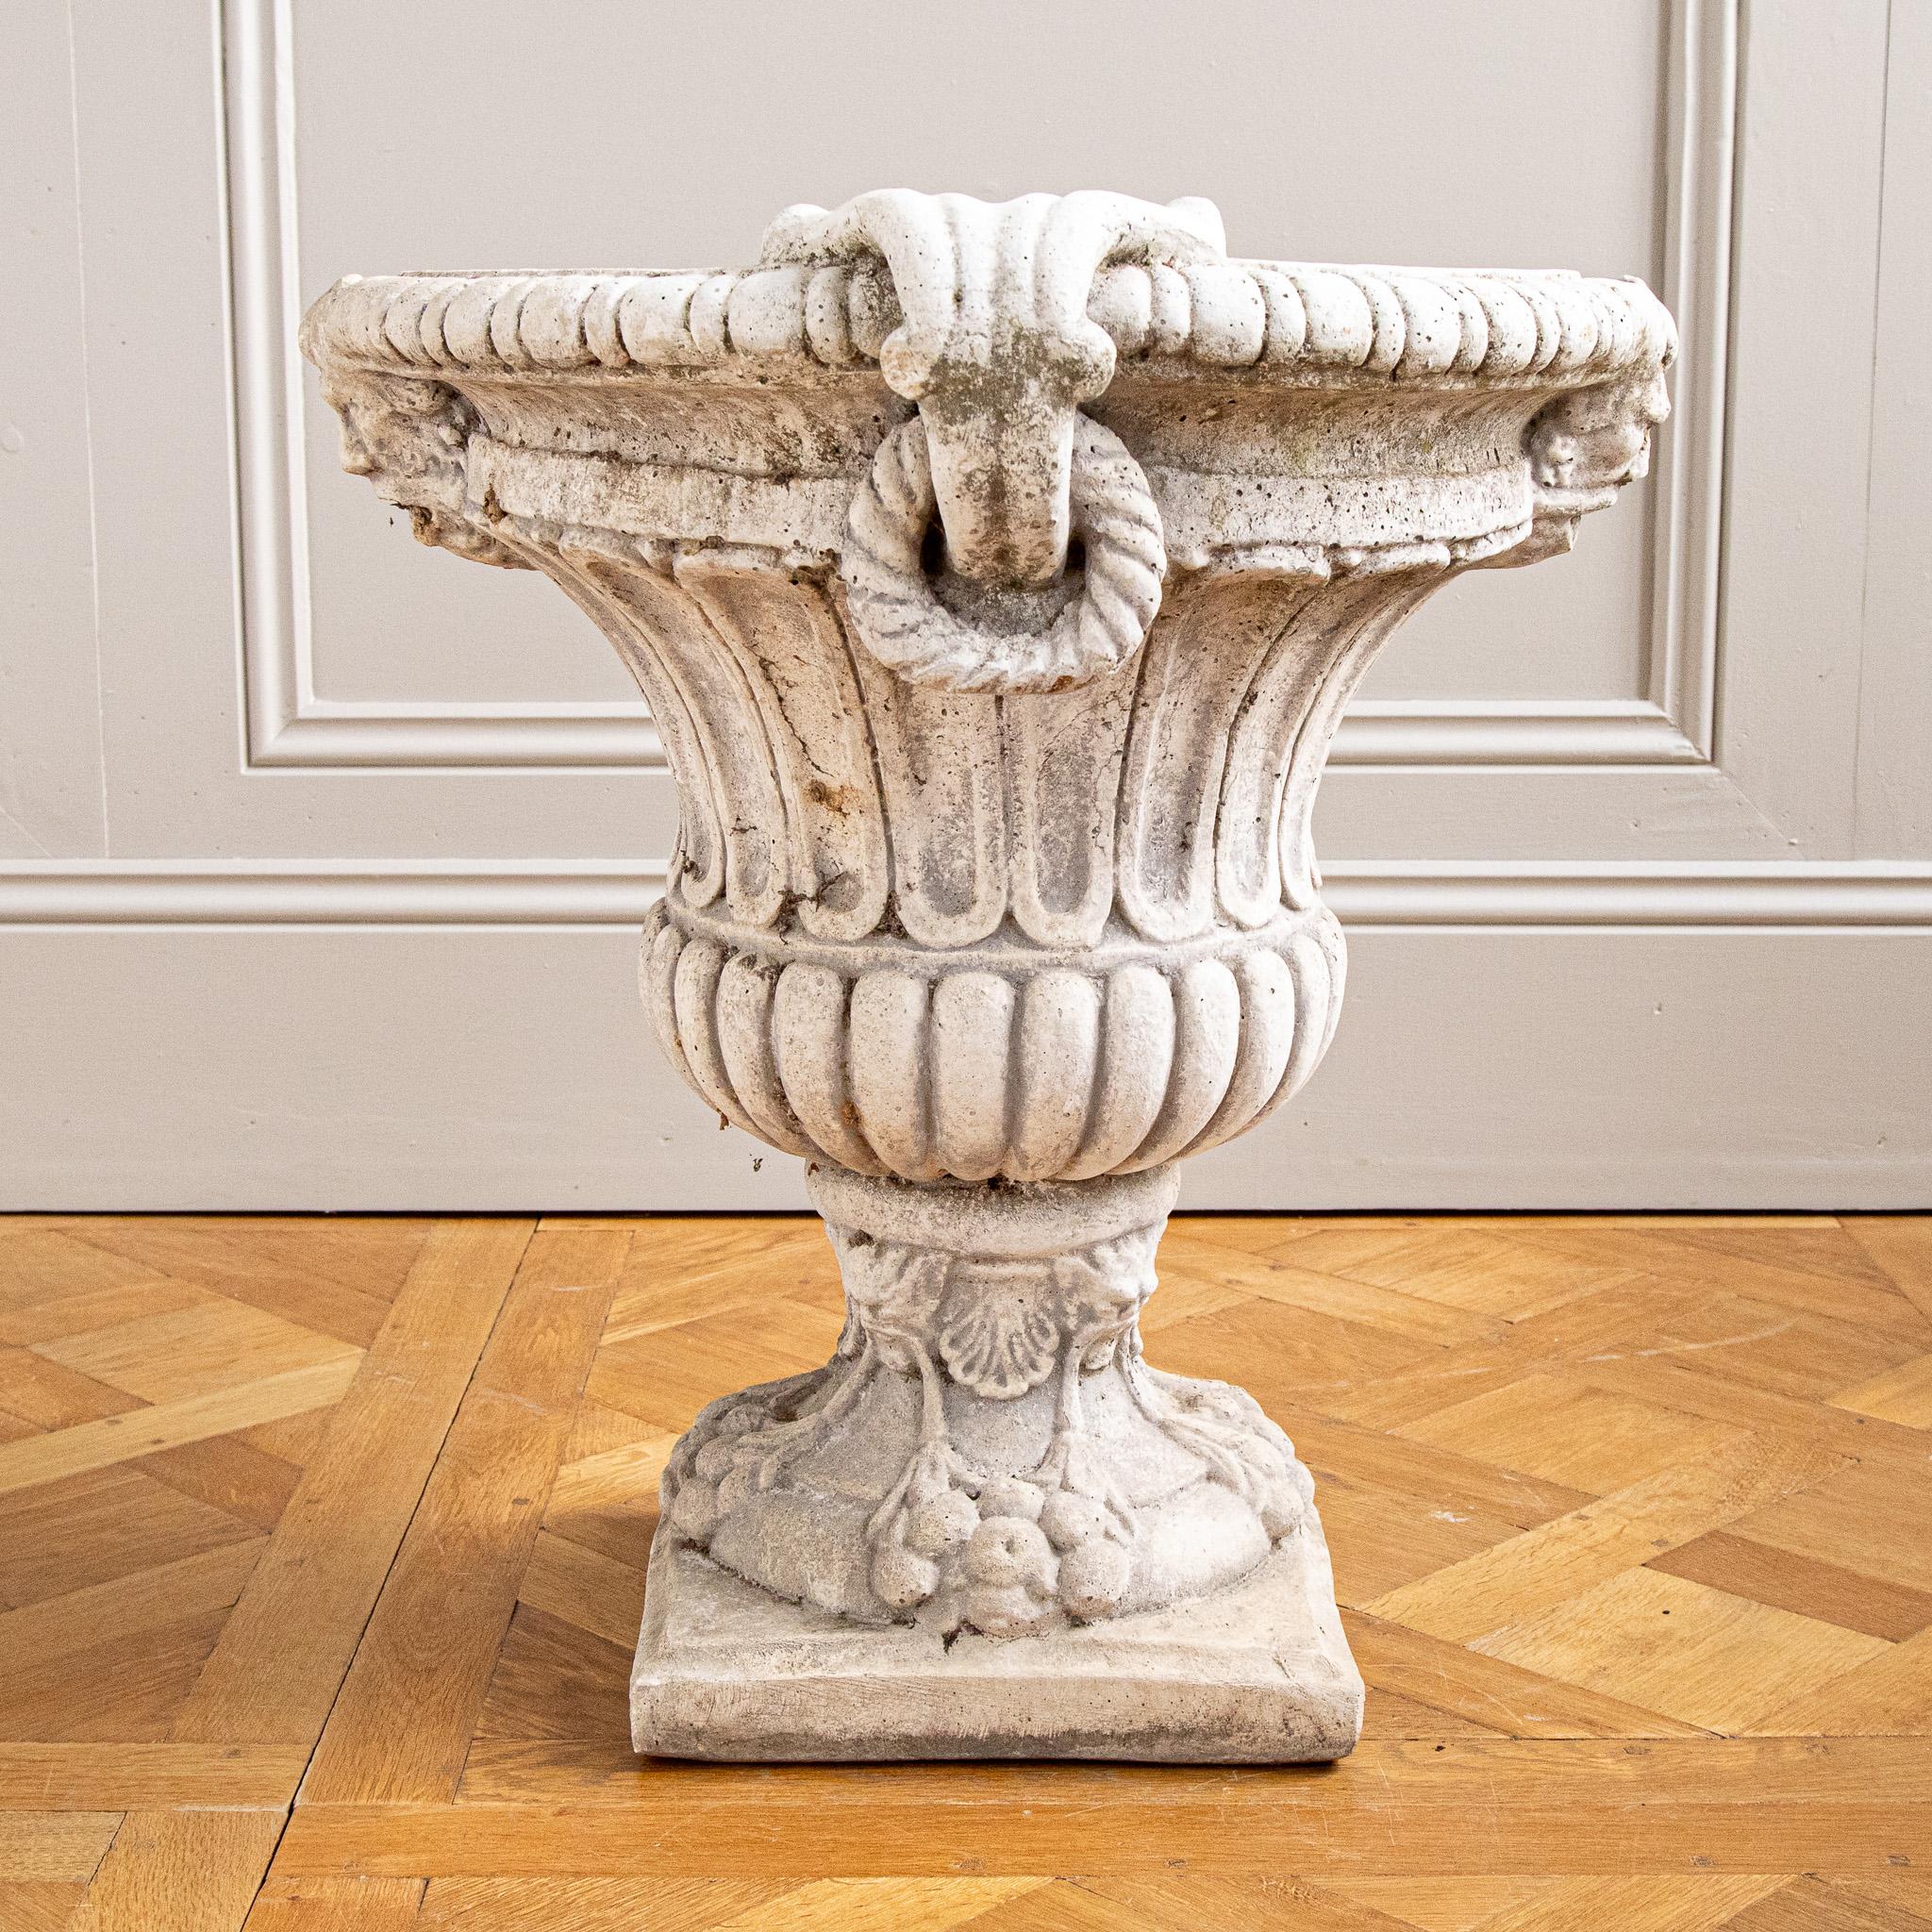 Circa Mid 1900's Set Of 4 Decorative Italian Garden Urns In Reconstituted Stone For Sale 2